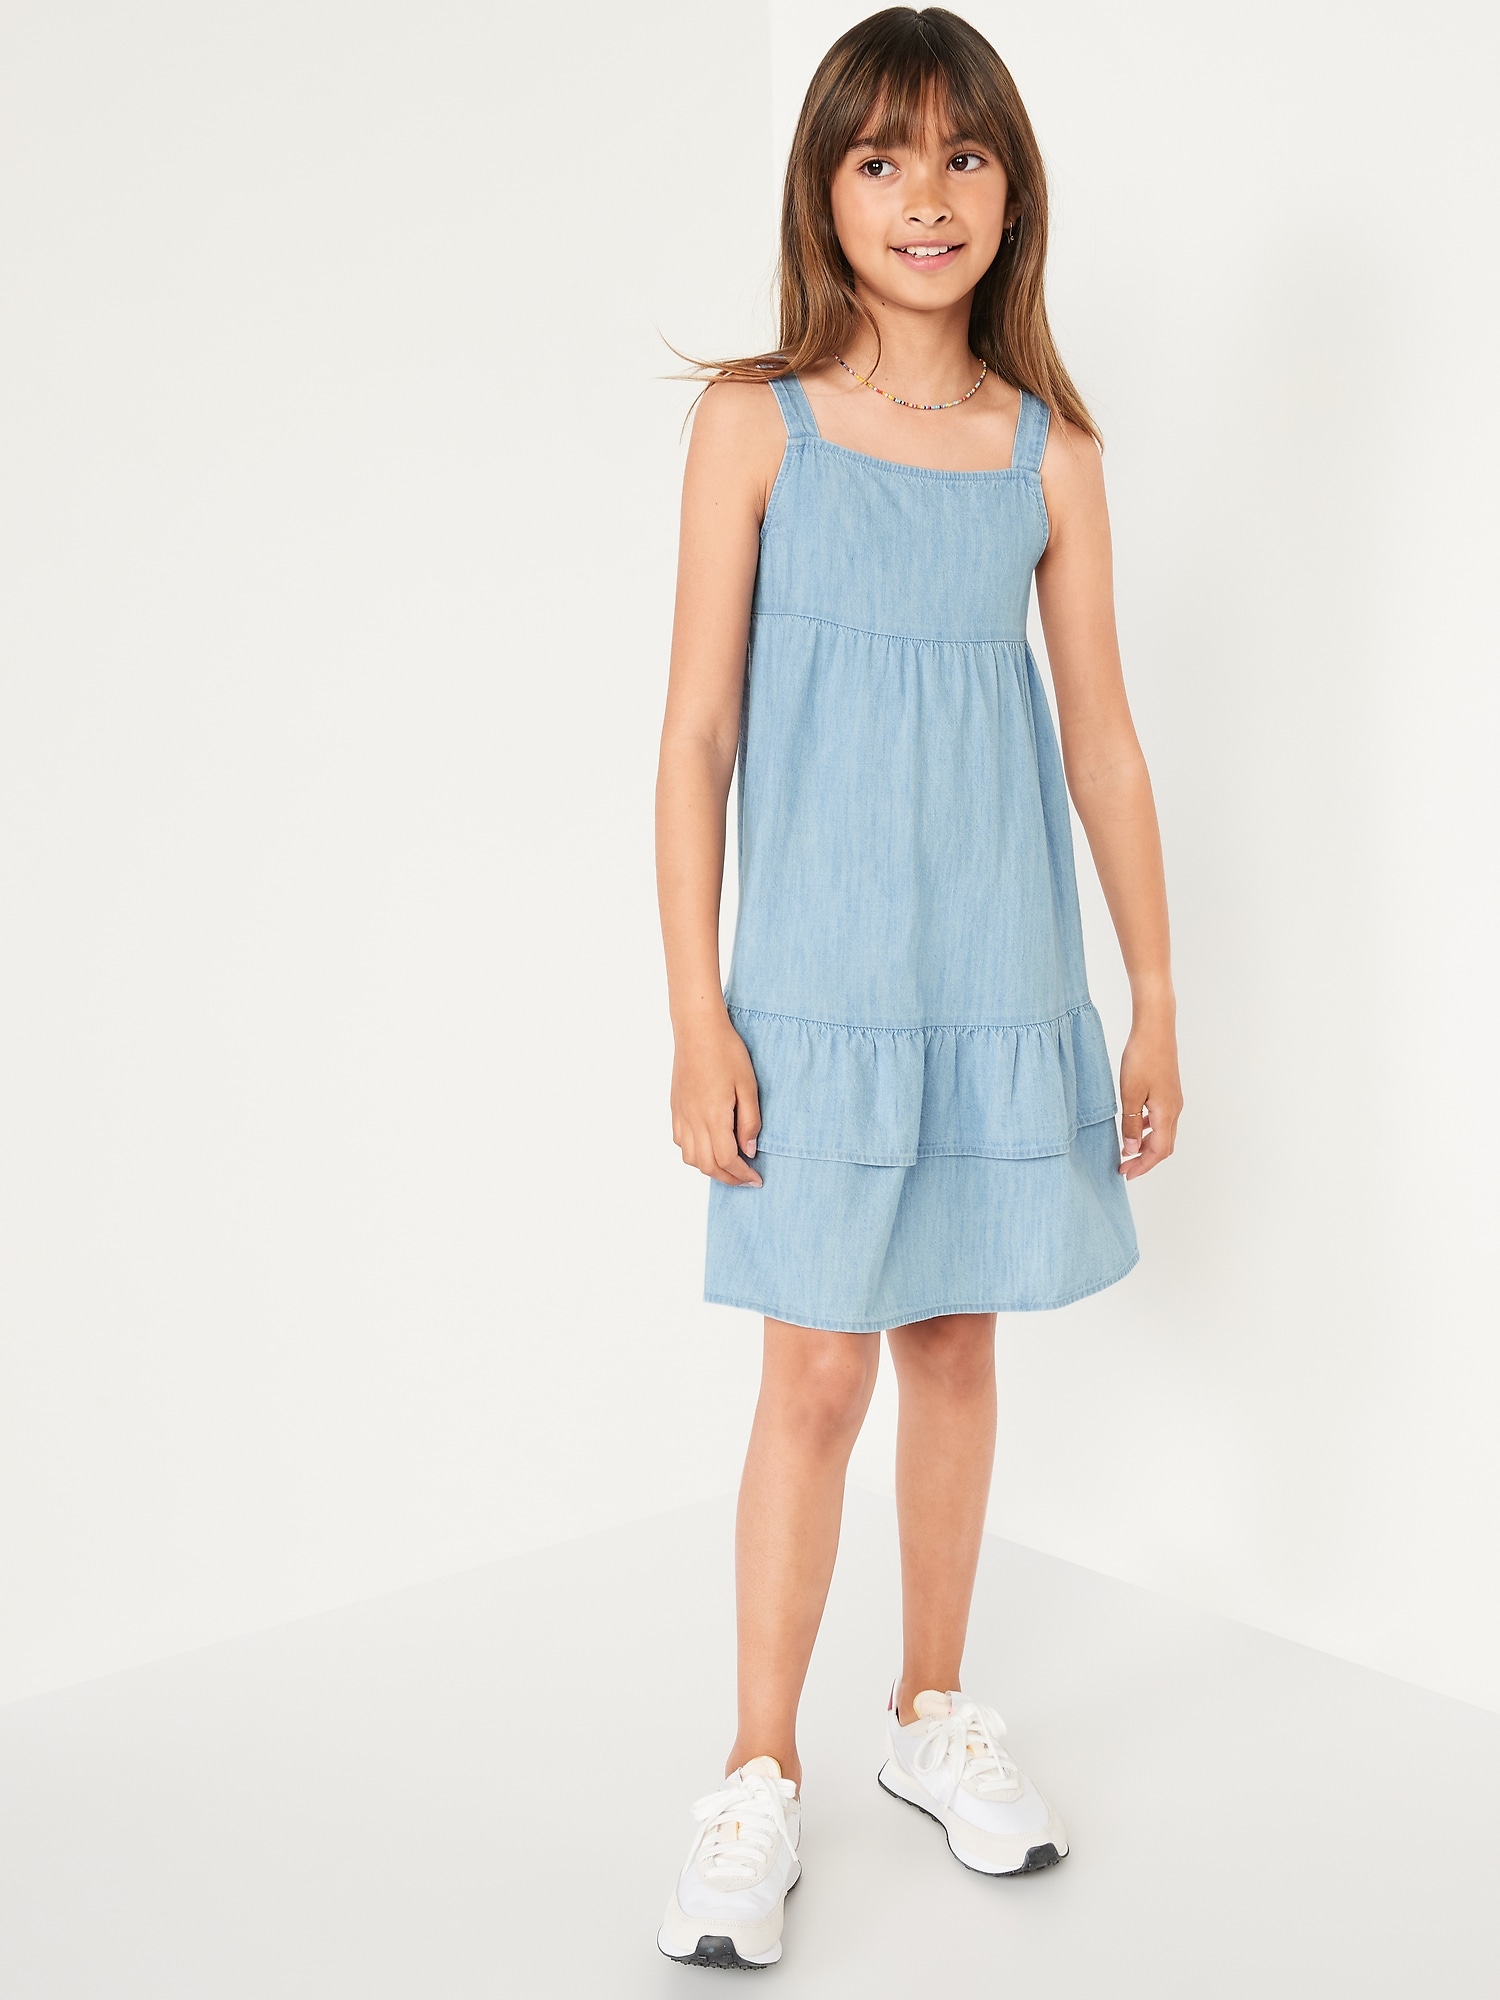 Sleeveless Tiered Chambray All-Day Midi Dress for Girls On Sale At Old Navy